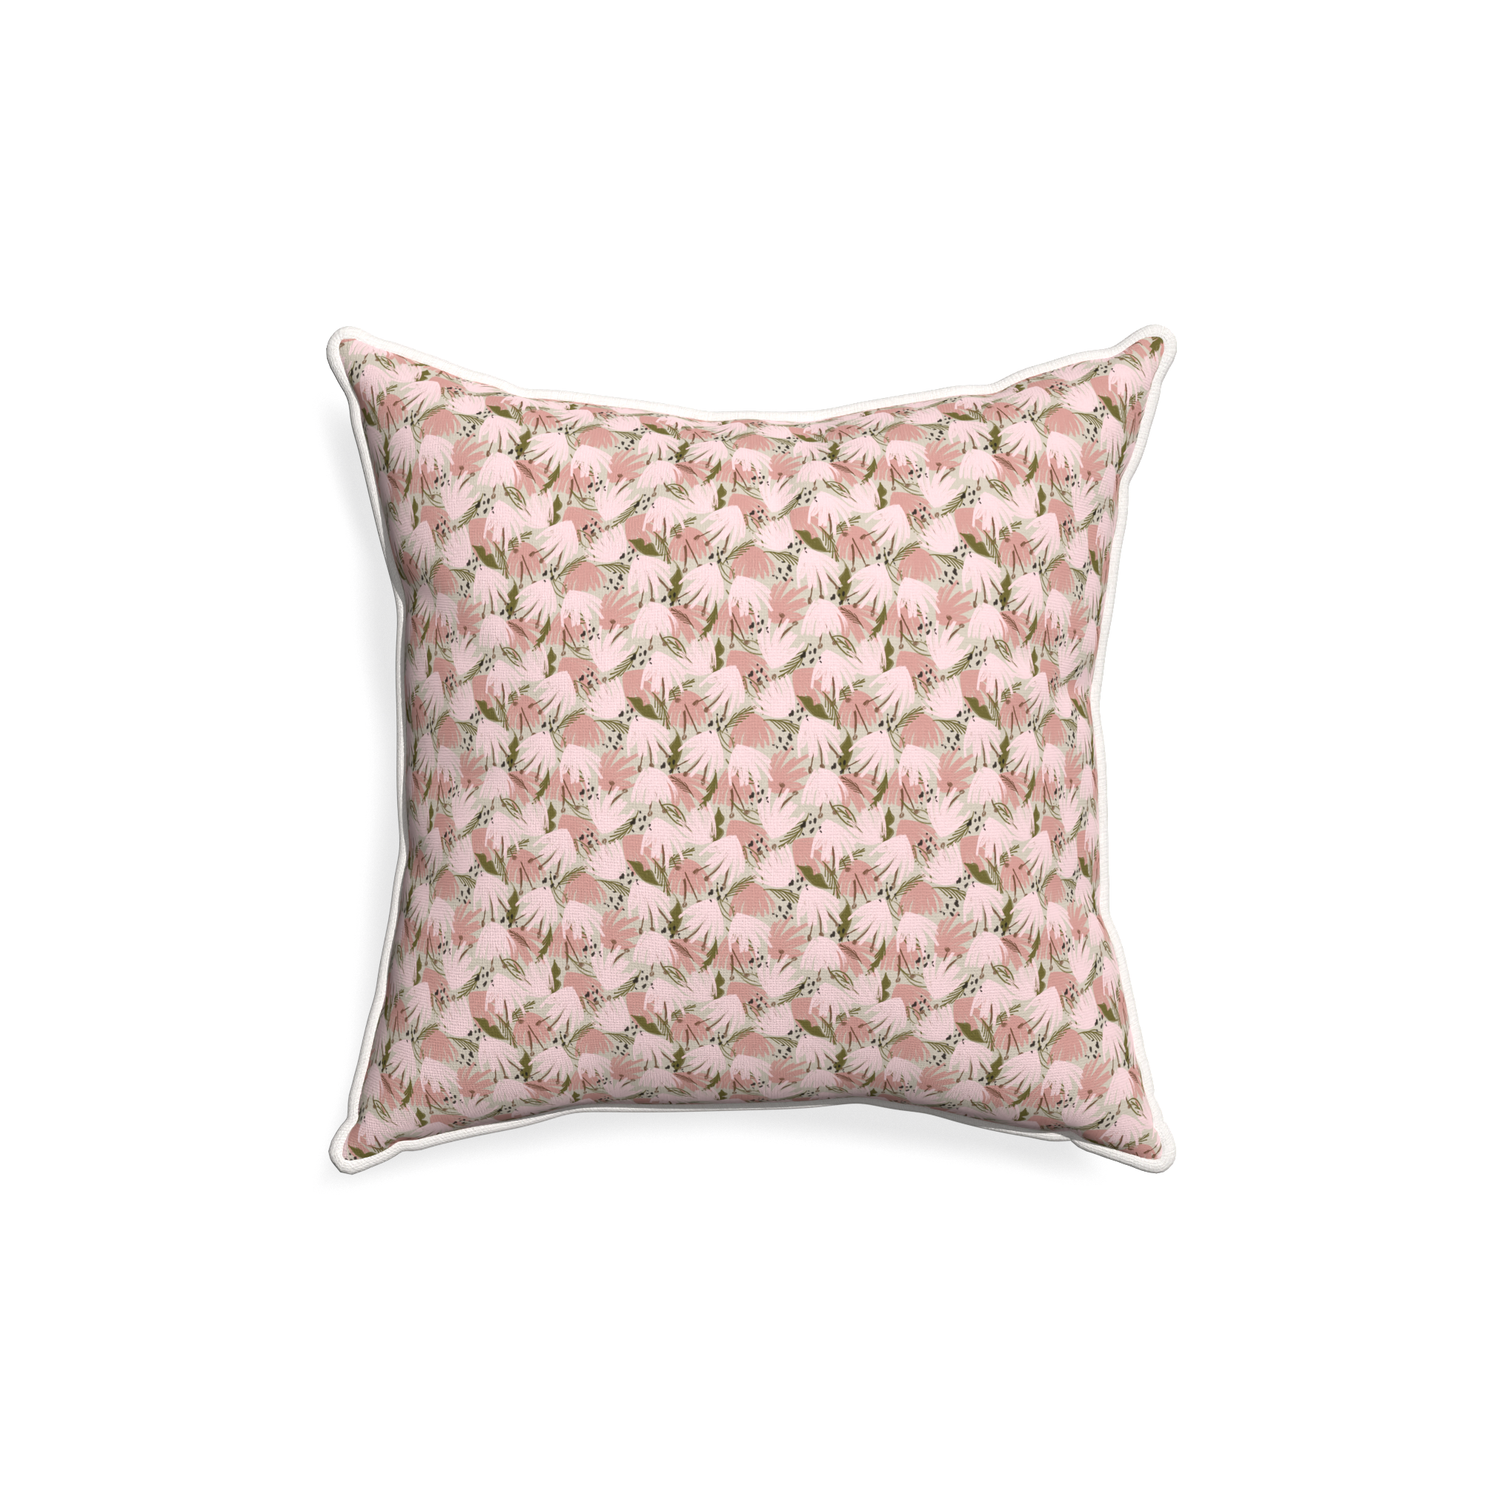 18-square eden pink custom pillow with snow piping on white background